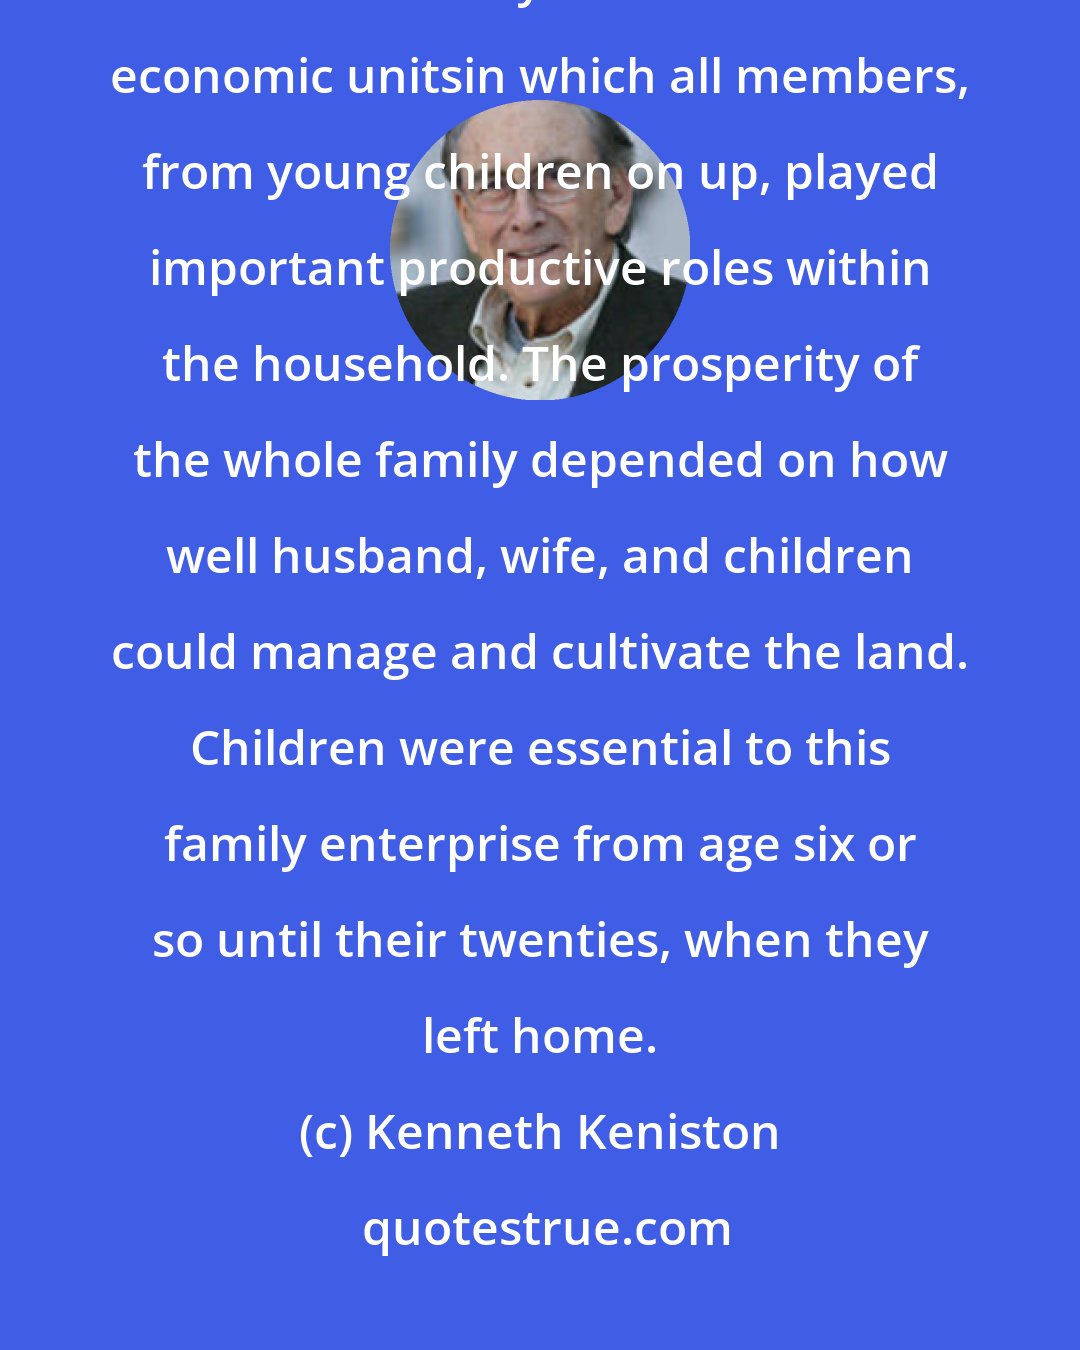 Kenneth Keniston: The most important difference between these early American families and our own is that early families constituted economic unitsin which all members, from young children on up, played important productive roles within the household. The prosperity of the whole family depended on how well husband, wife, and children could manage and cultivate the land. Children were essential to this family enterprise from age six or so until their twenties, when they left home.